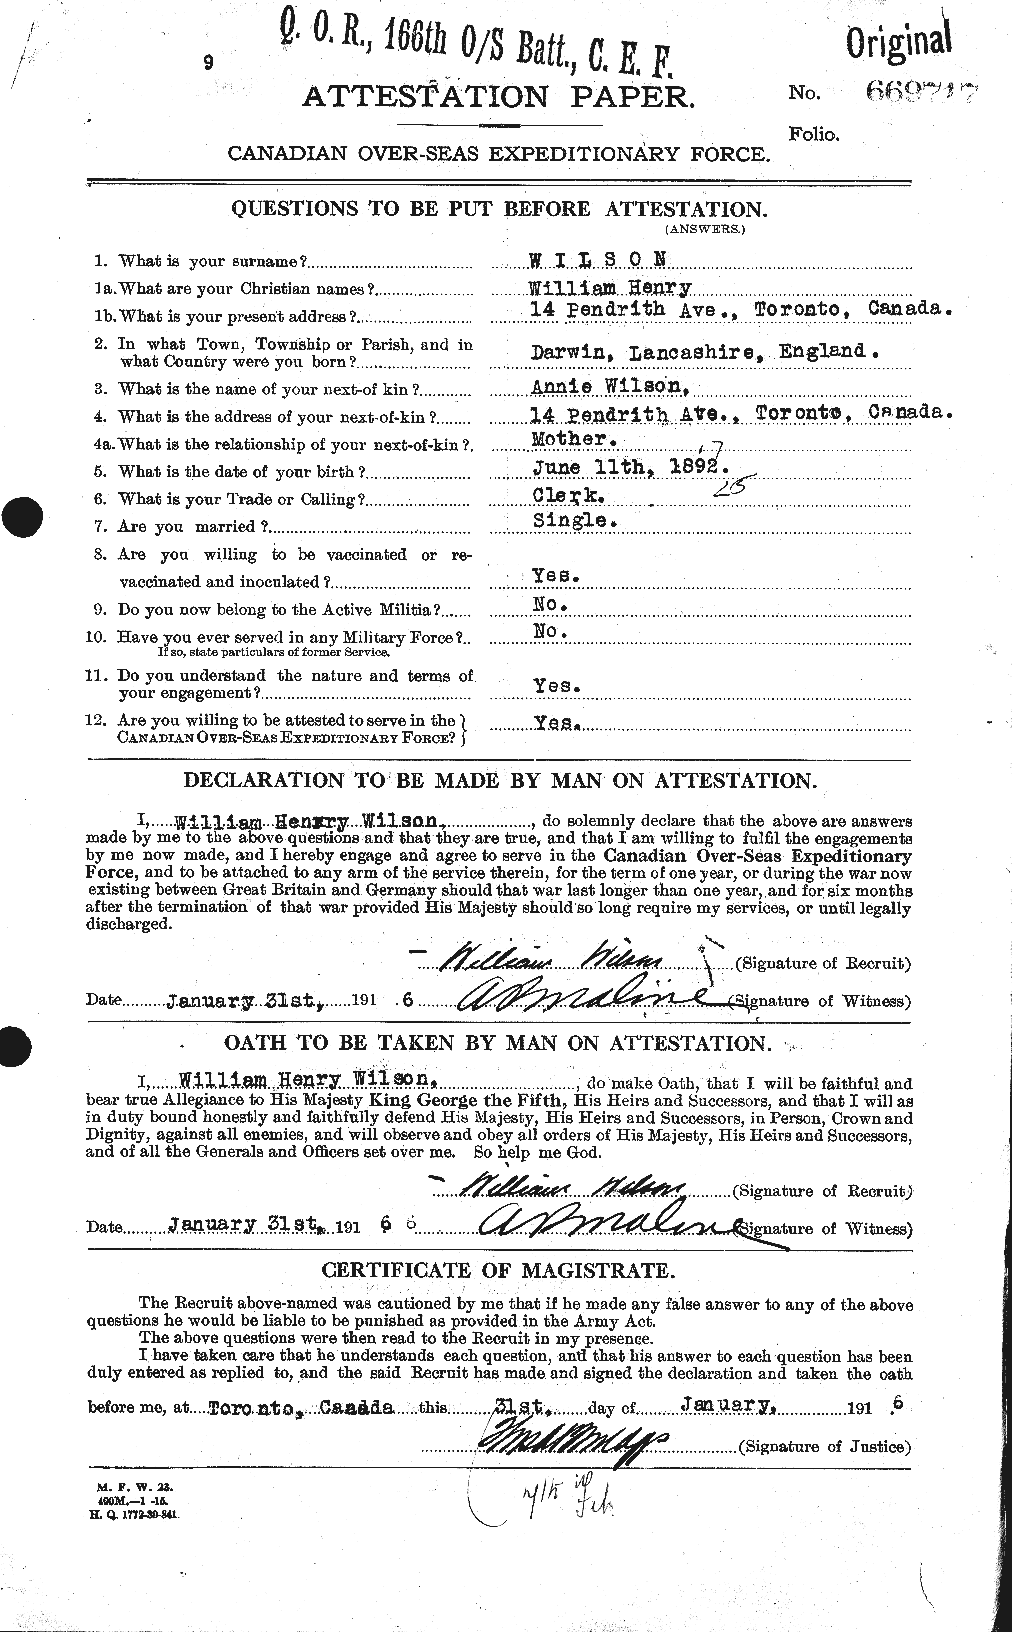 Personnel Records of the First World War - CEF 682023a